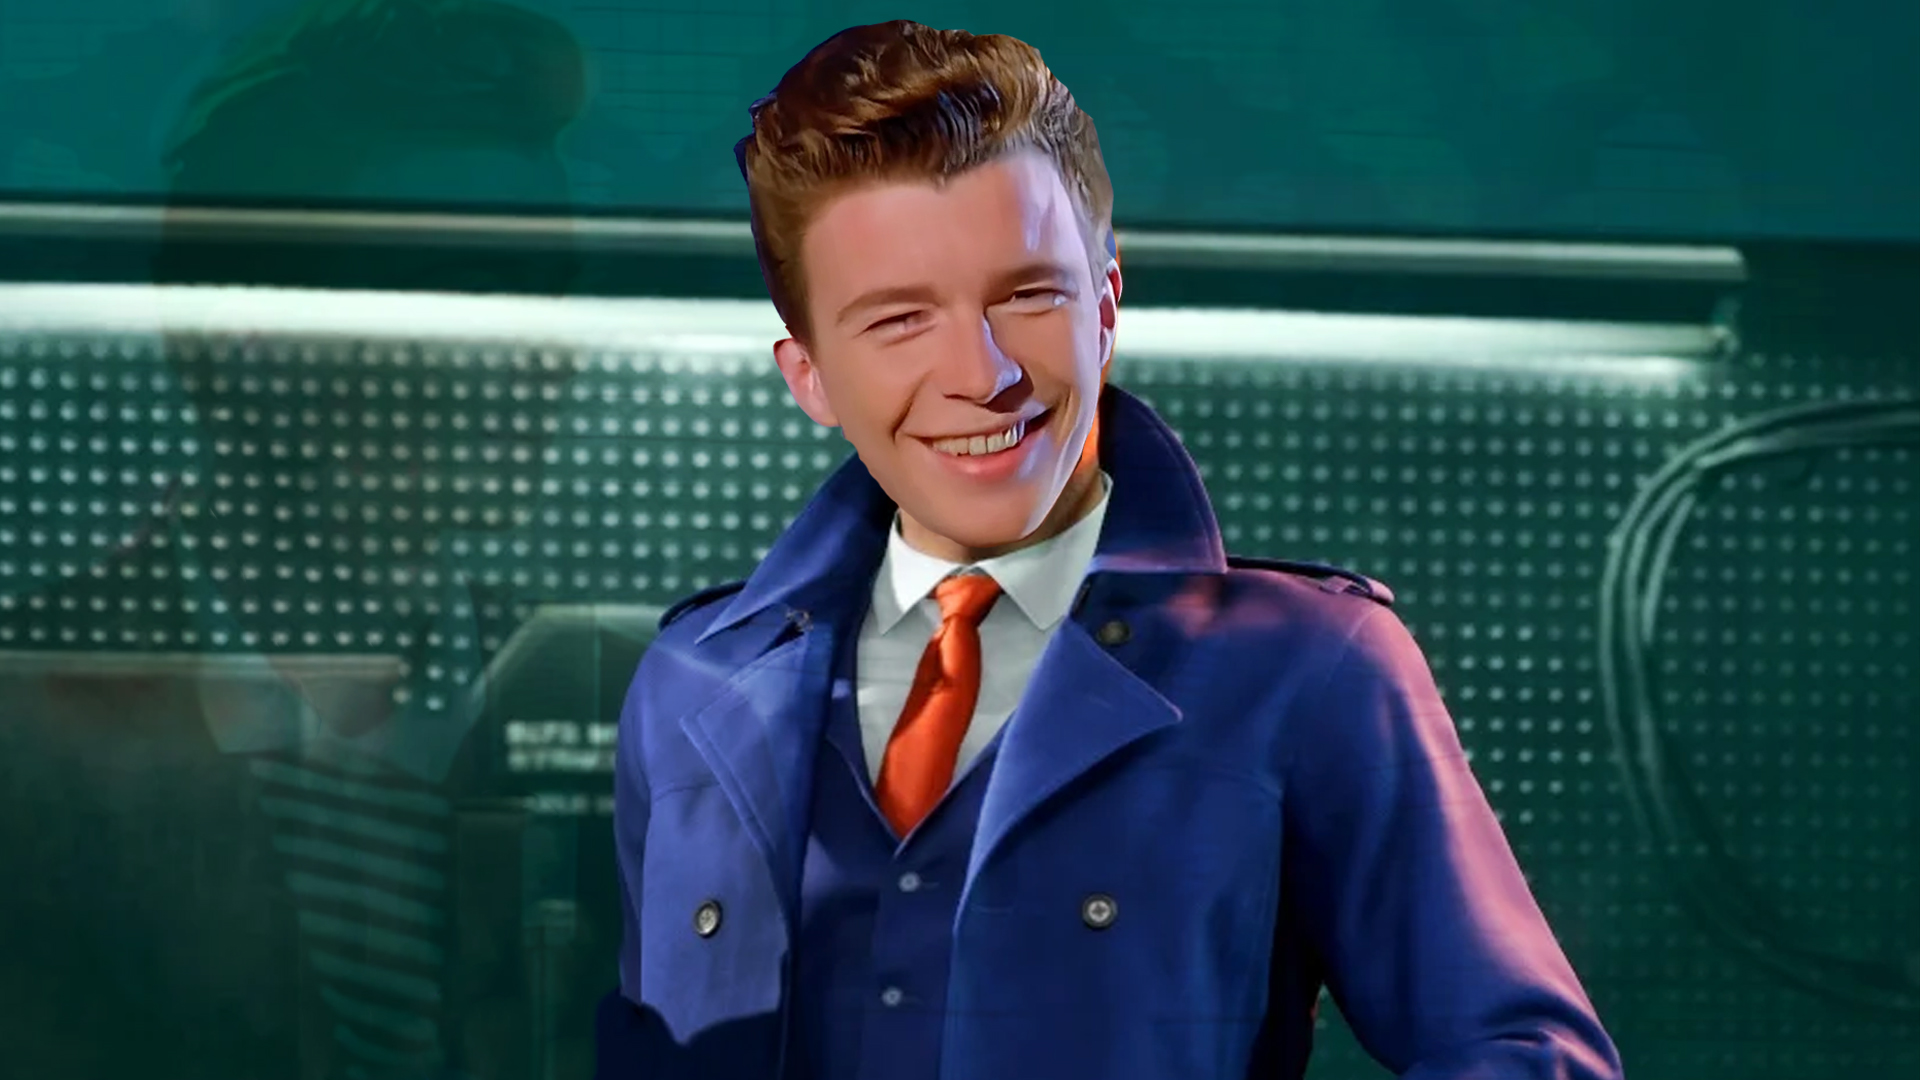 Rick Astley/Rickroll going back in time (ULTIMATE CROSSOVER